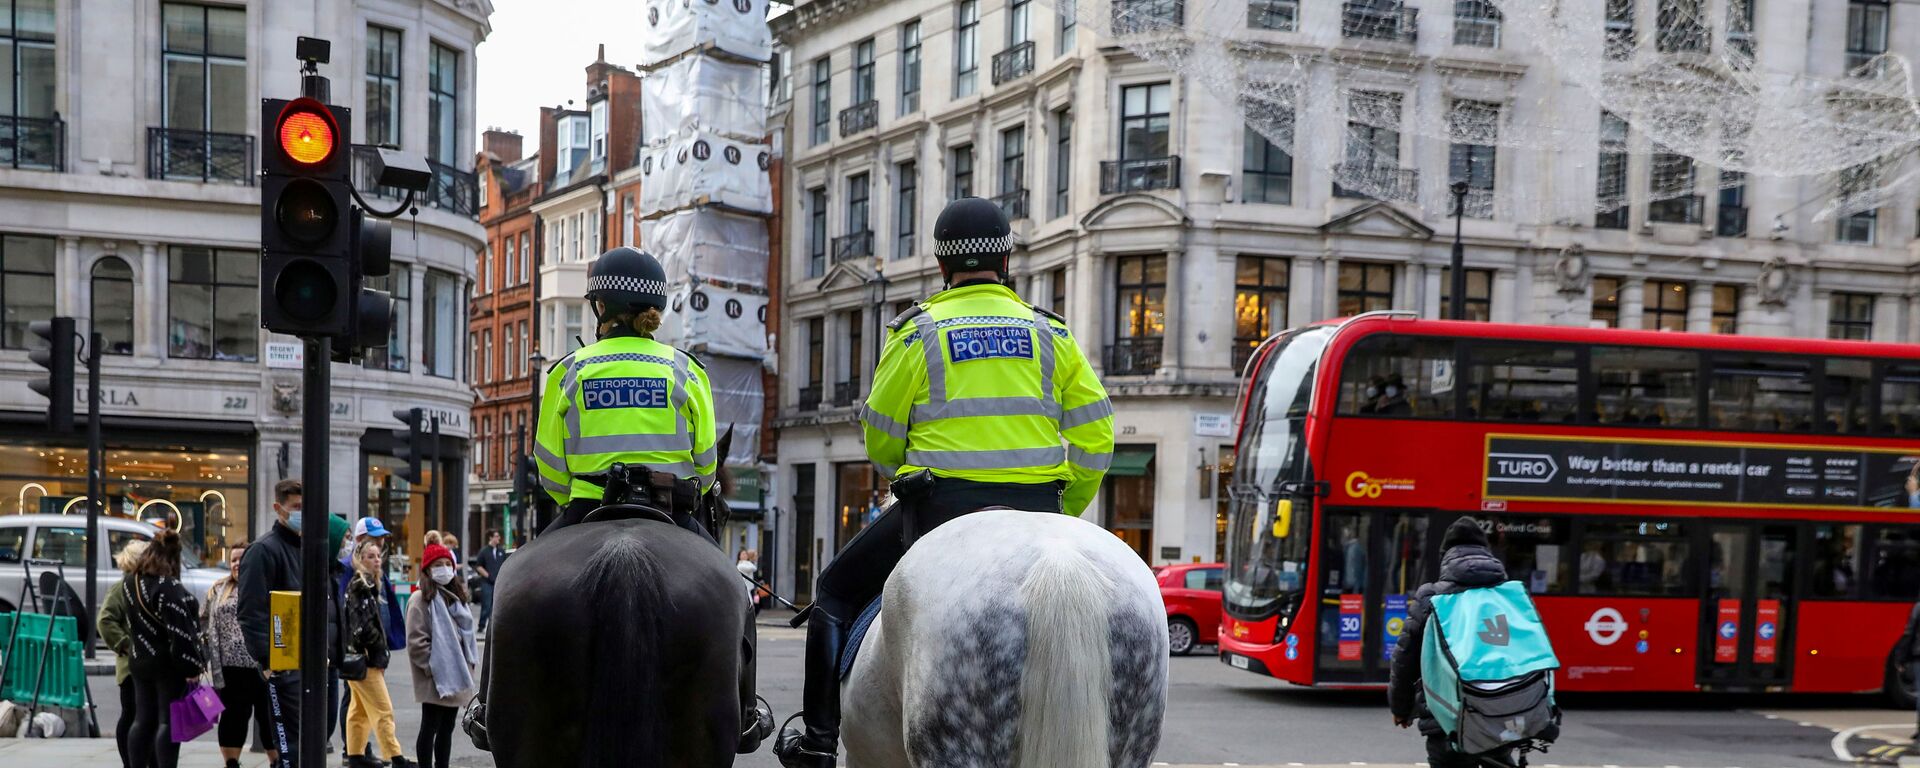 FILE PHOTO: Mounted police and a Deliveroo rider wait at a red light at Regent Street, one of London's main shopping streets, a day after a new lockdown was announced during the coronavirus disease (COVID-19) outbreak in London, Britain November 1, 2020 - Sputnik International, 1920